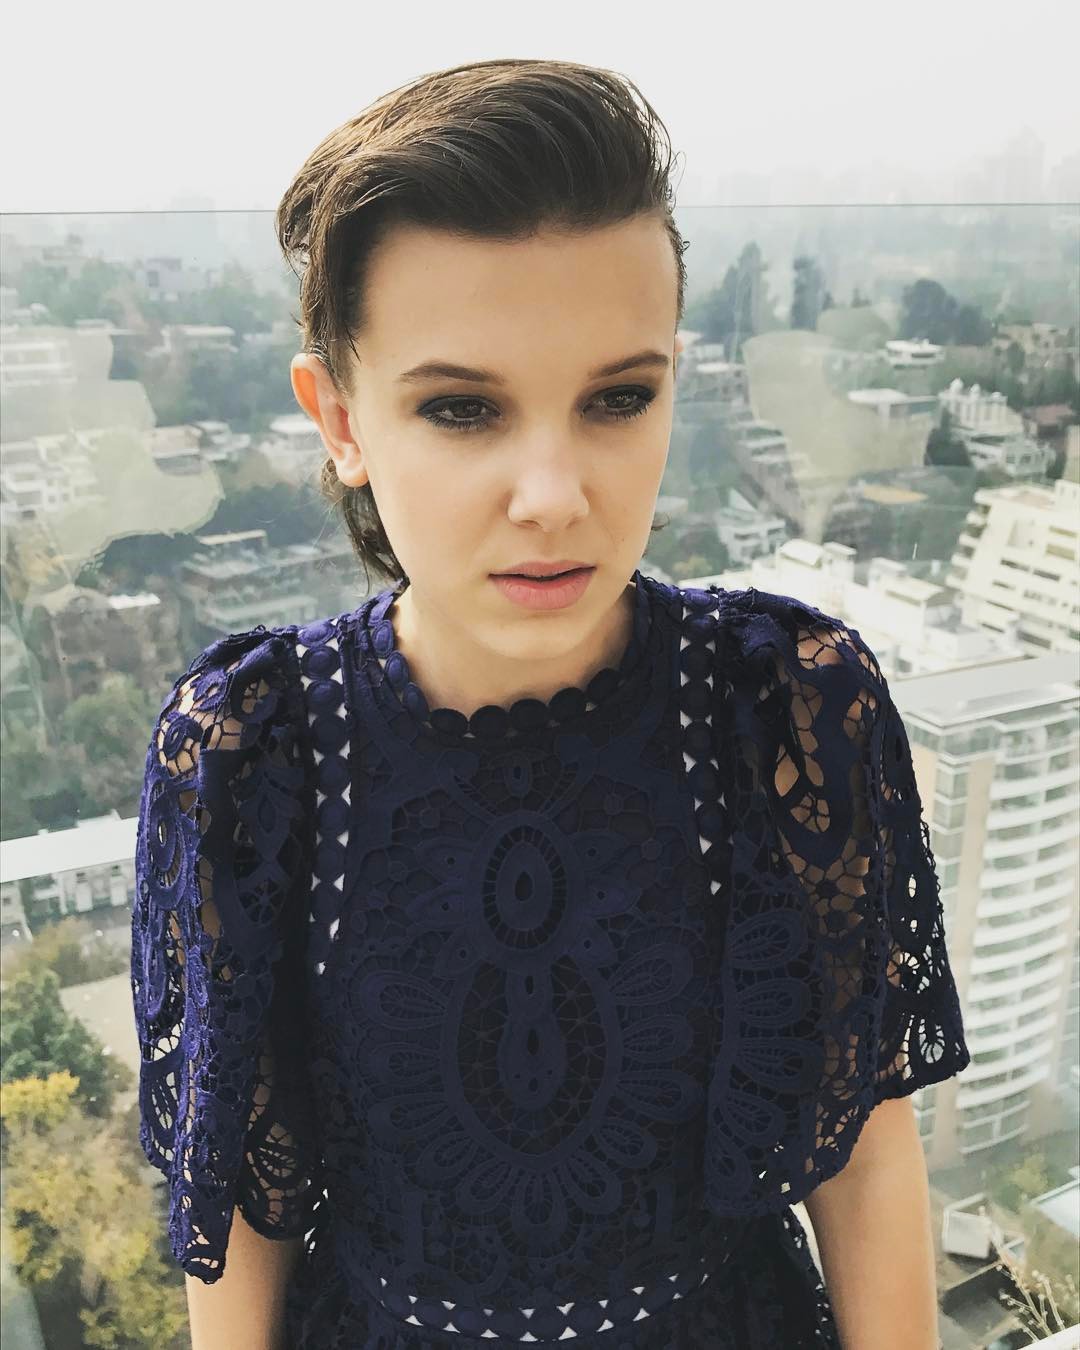 Picture of Millie Bobby Brown in General Pictures - millie-bobby-brown-1496106001.jpg ...1080 x 1350